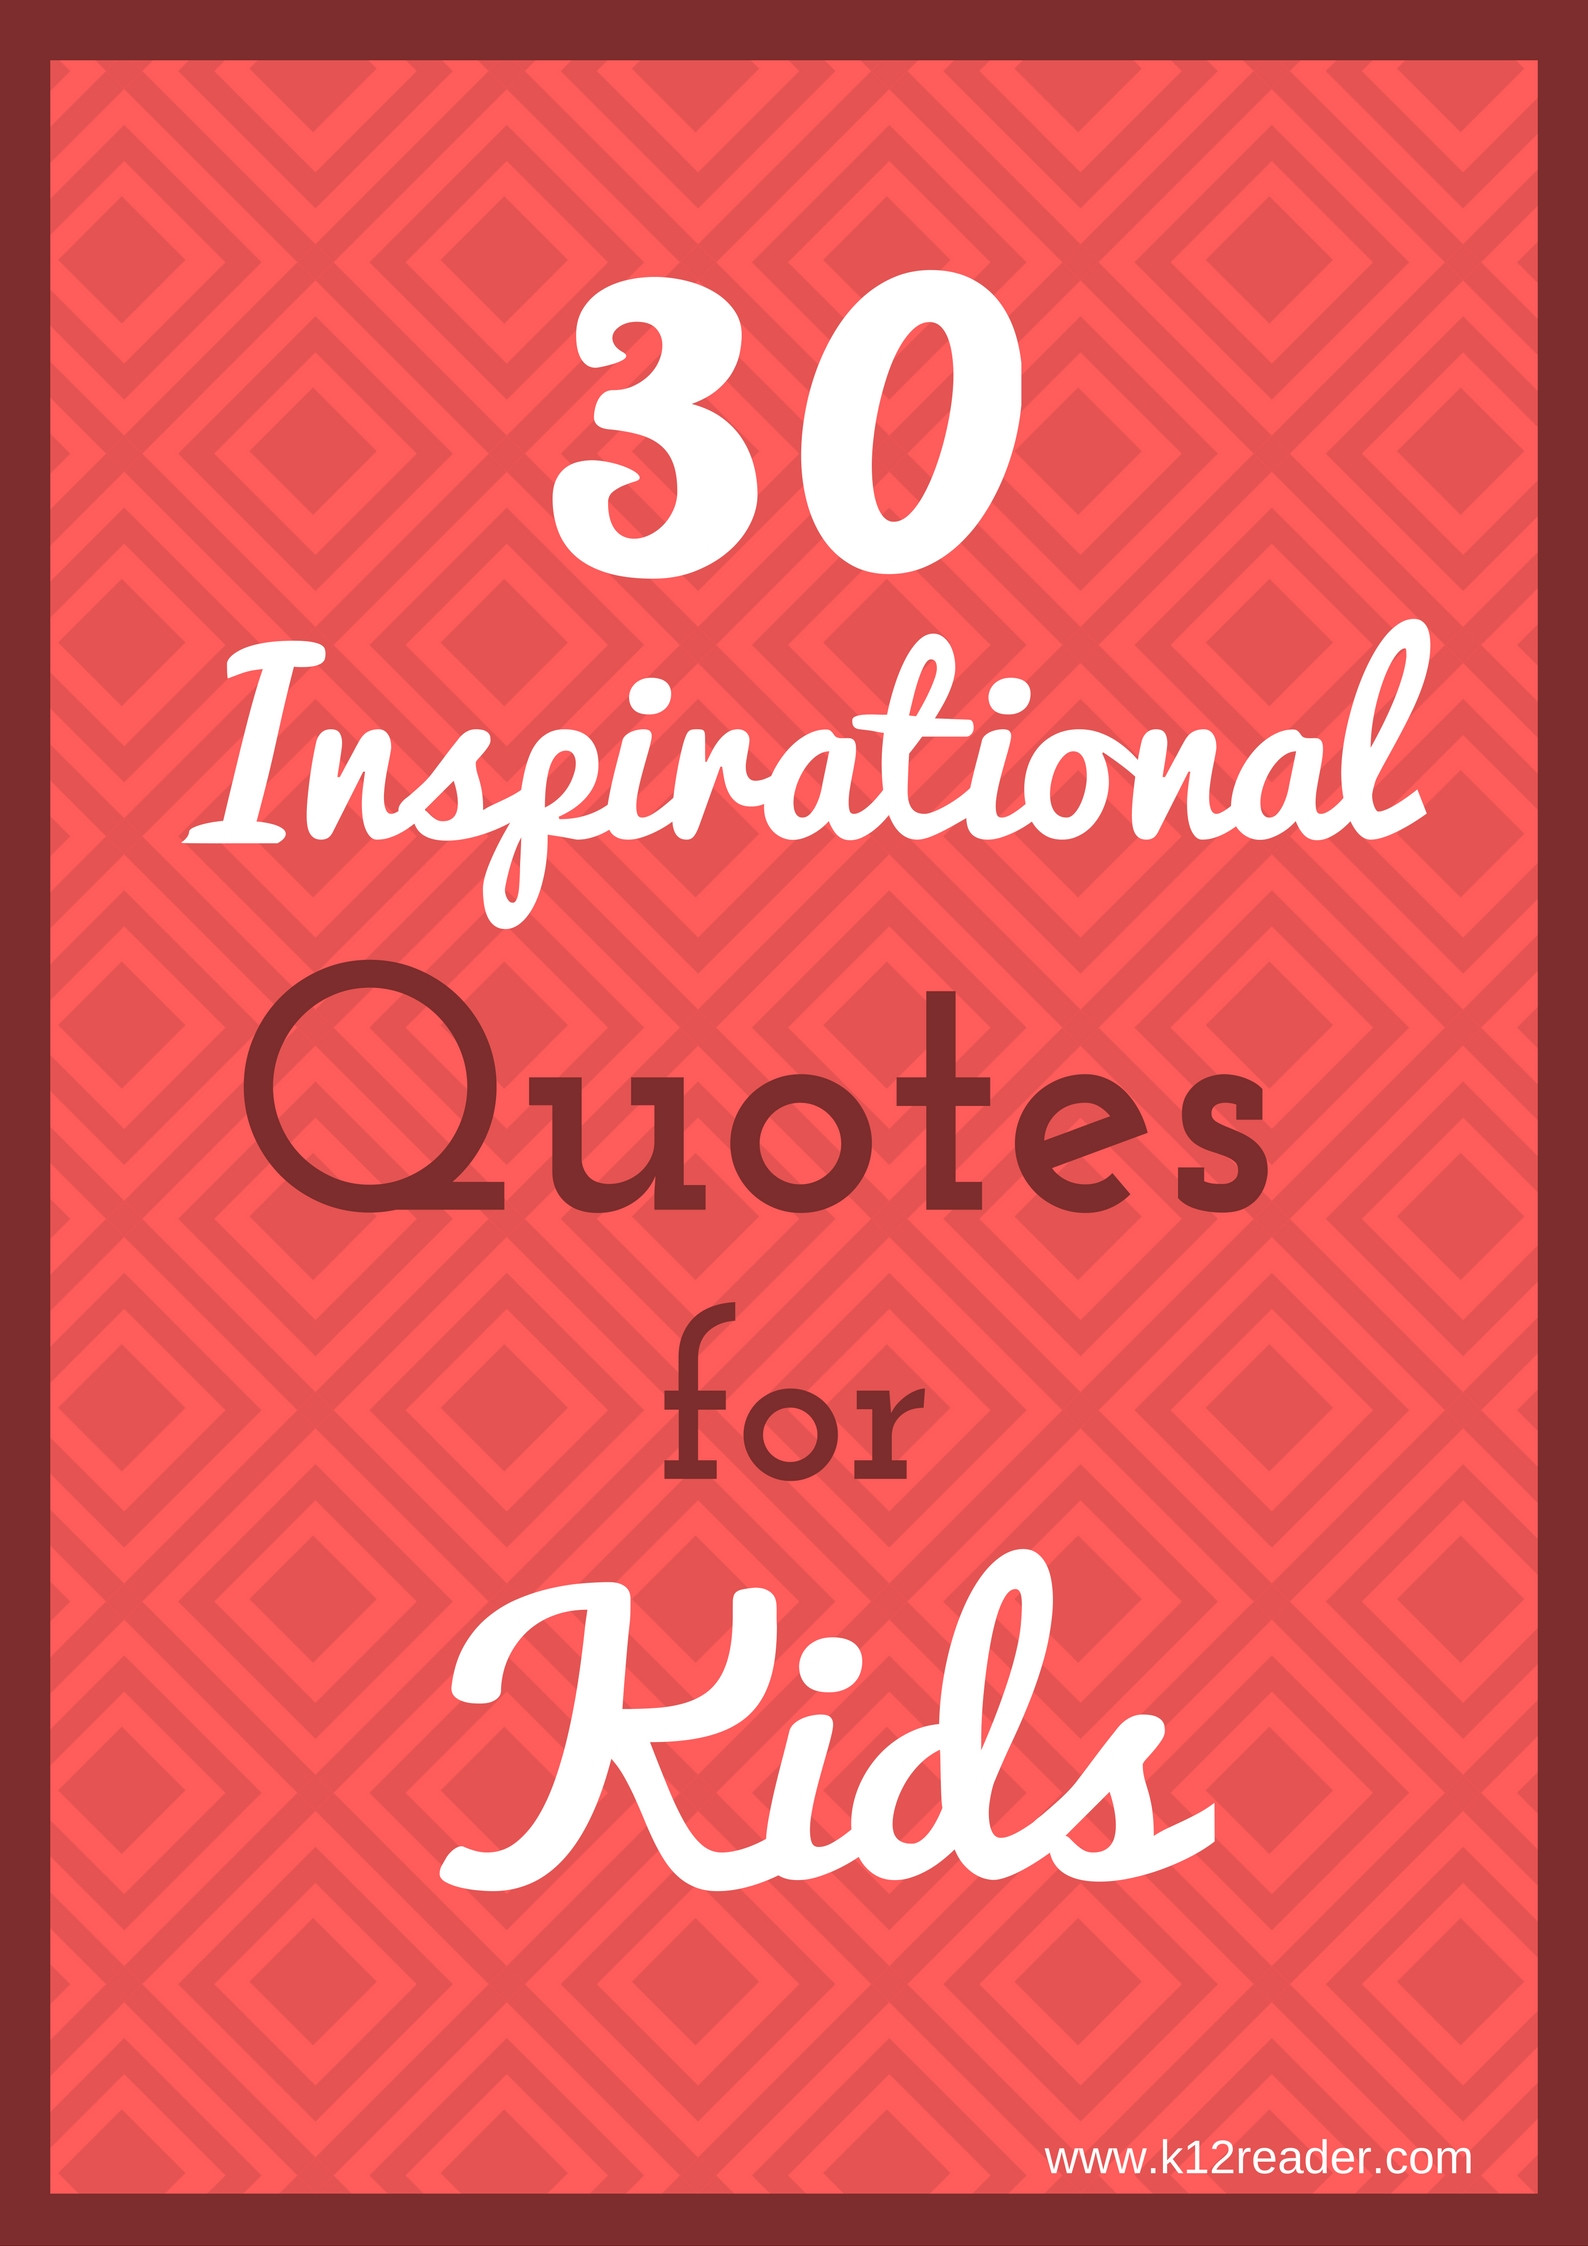 Inspirational Childrens Quotes
 30 Inspirational Quotes for Kids